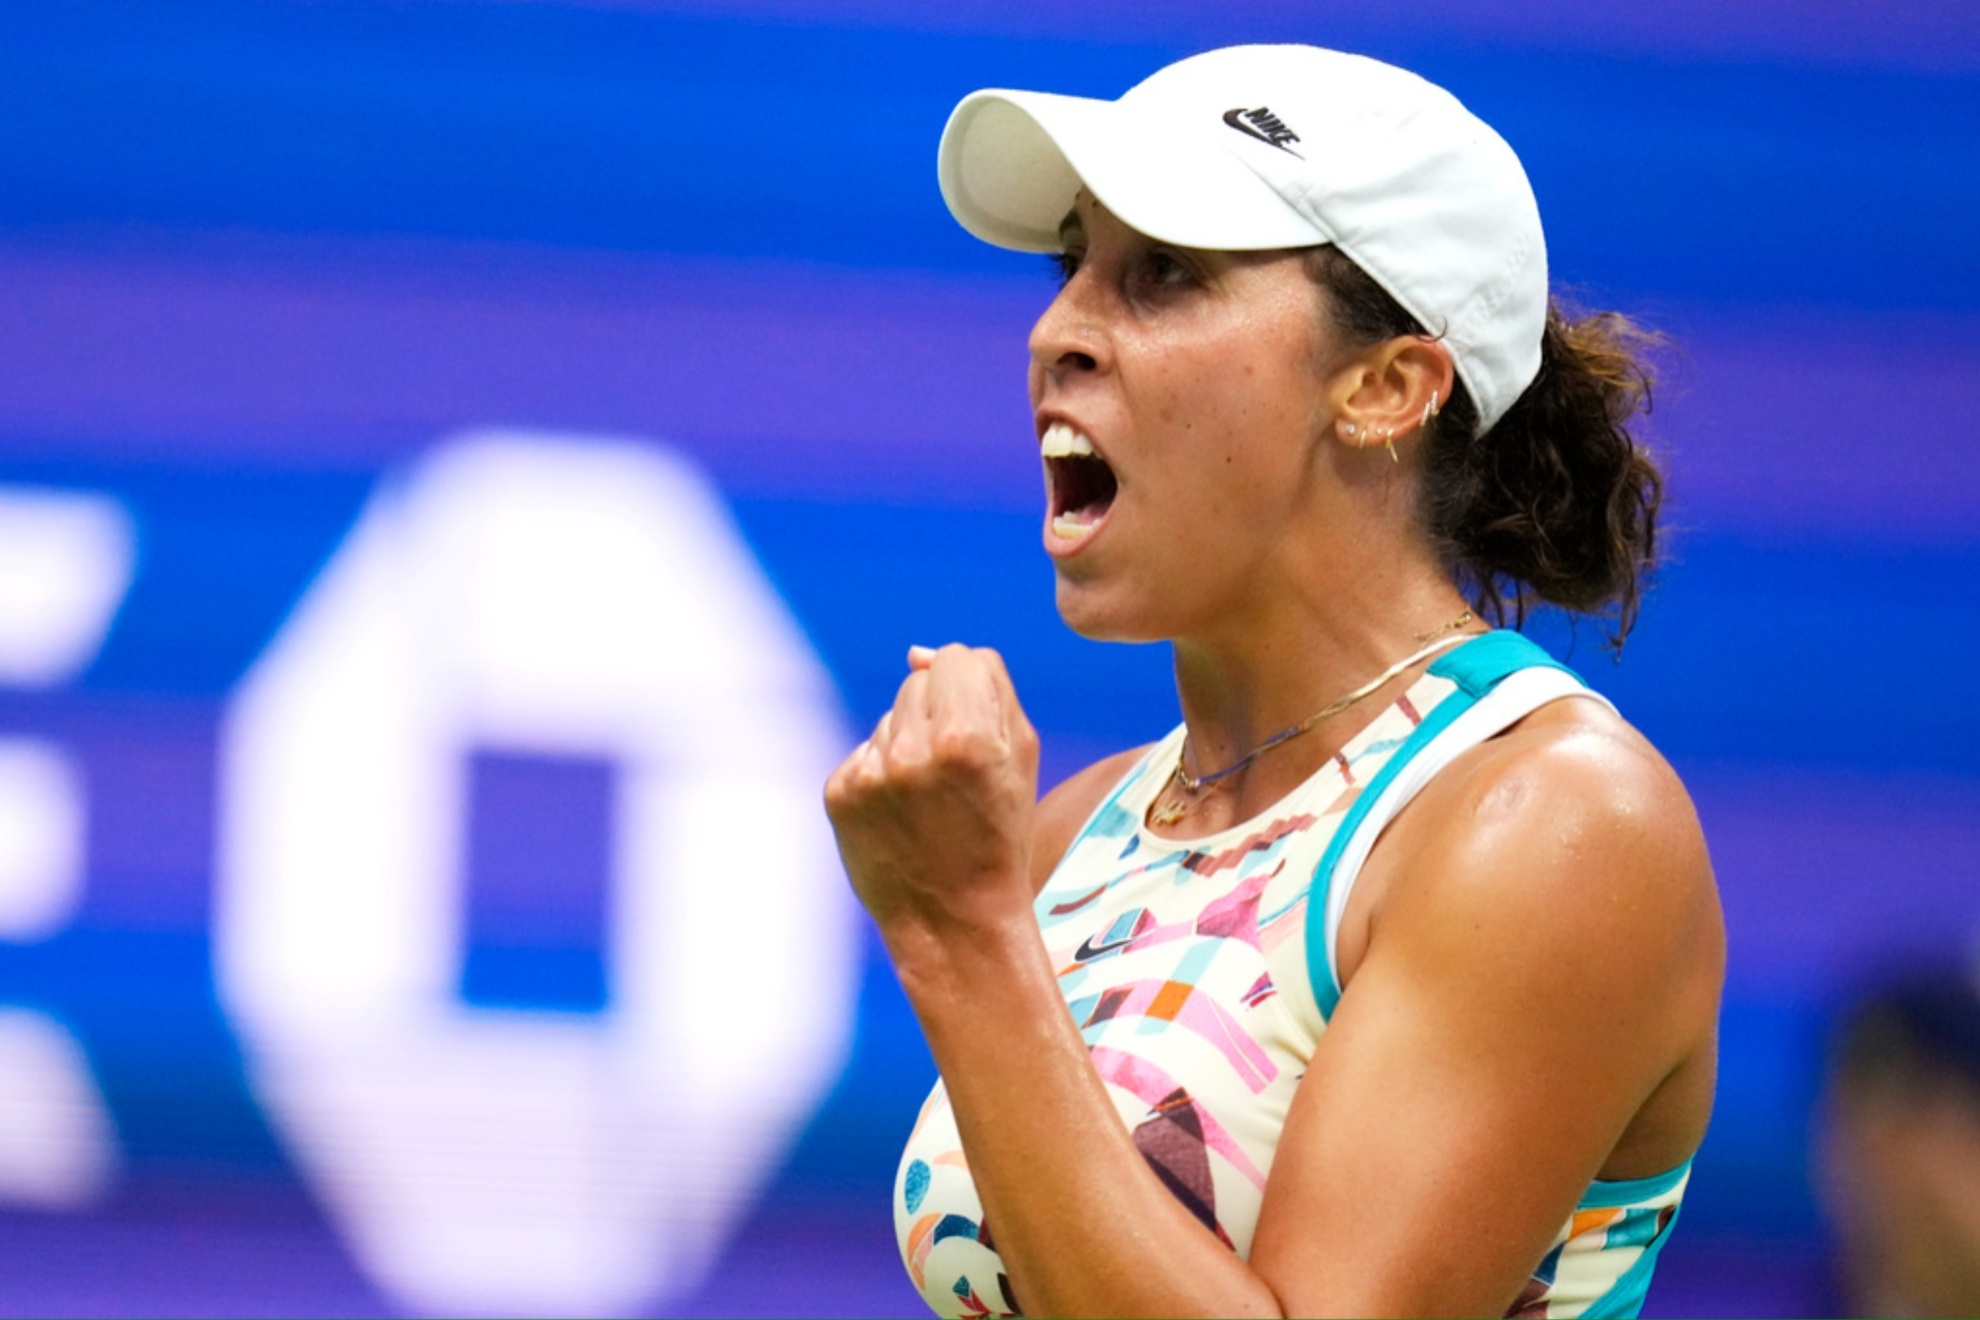 Madison Keys Makes History: Into Quarterfinals of WTA 1000 Madrid Open - Madison Keys' Road to the Quarterfinals